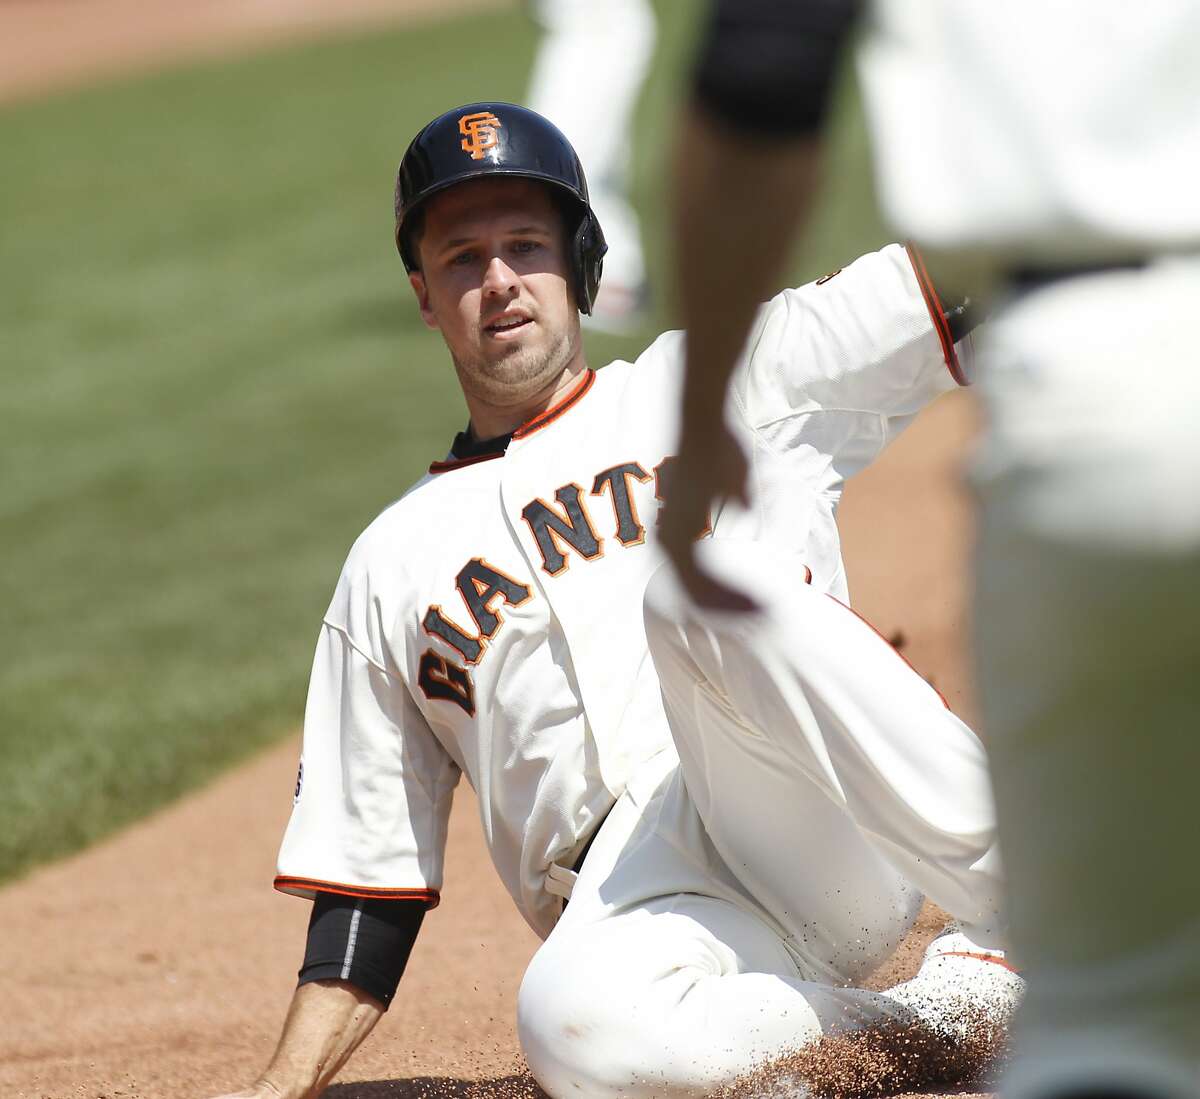 San Francisco Giants' Buster Posey scores against the St. Louis Cardinals during the first inning of a baseball game, Sunday, Aug. 30, 2015, in San Francisco. (AP Photo/George Nikitin)